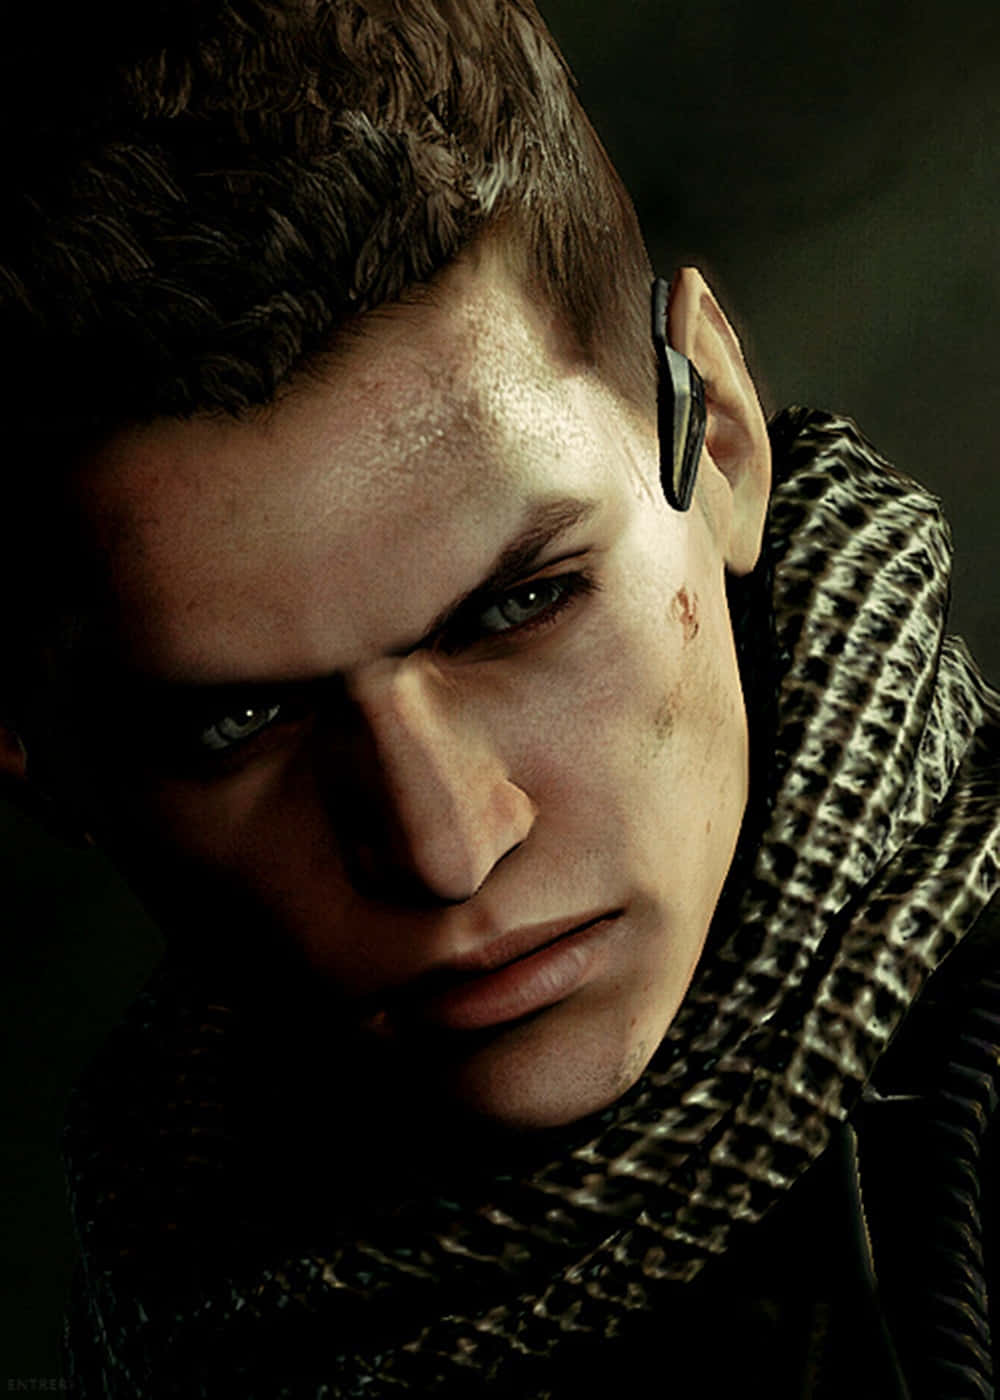 Piers Nivans From Resident Evil In A Dramatic Posture. Wallpaper